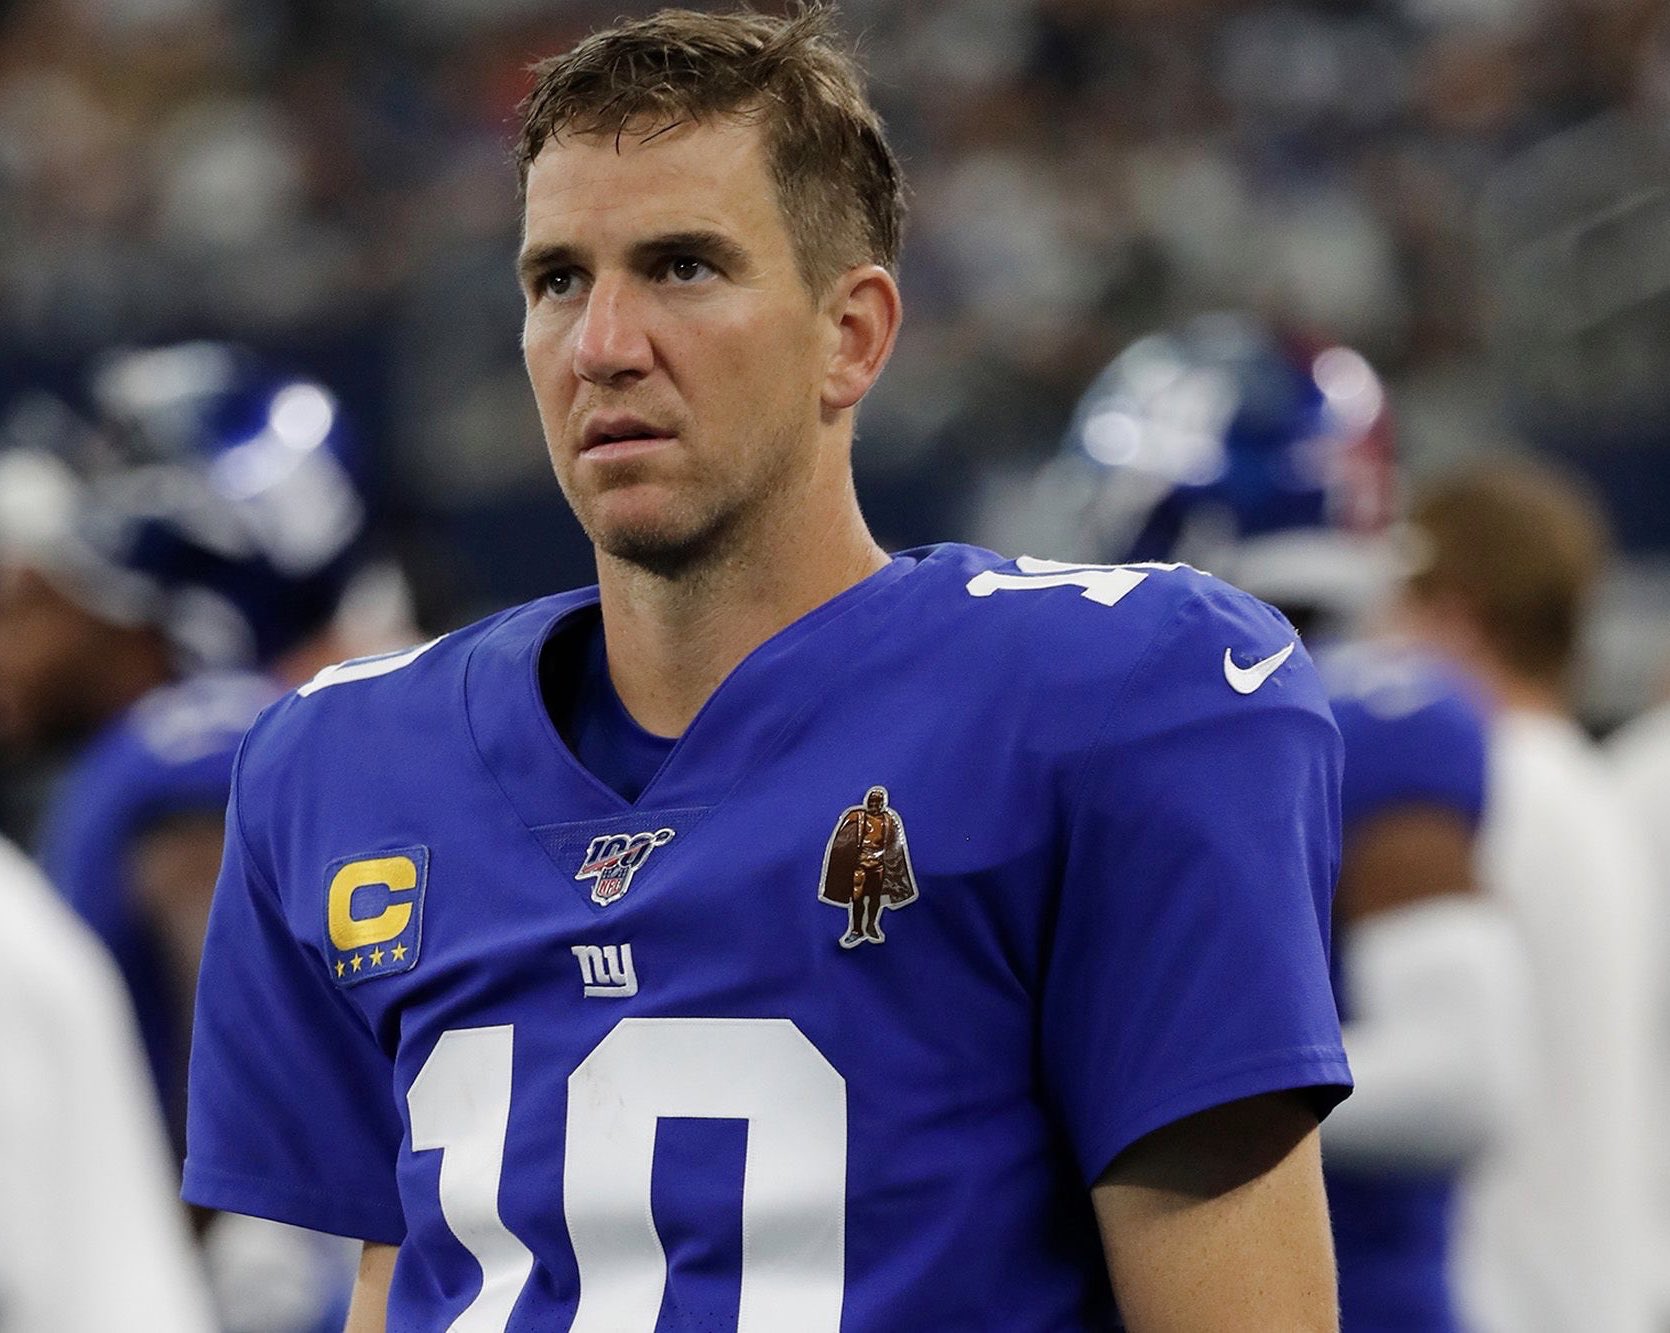 Today is Eli Manning s 39th birthday 
One like = one happy birthday to Eli 